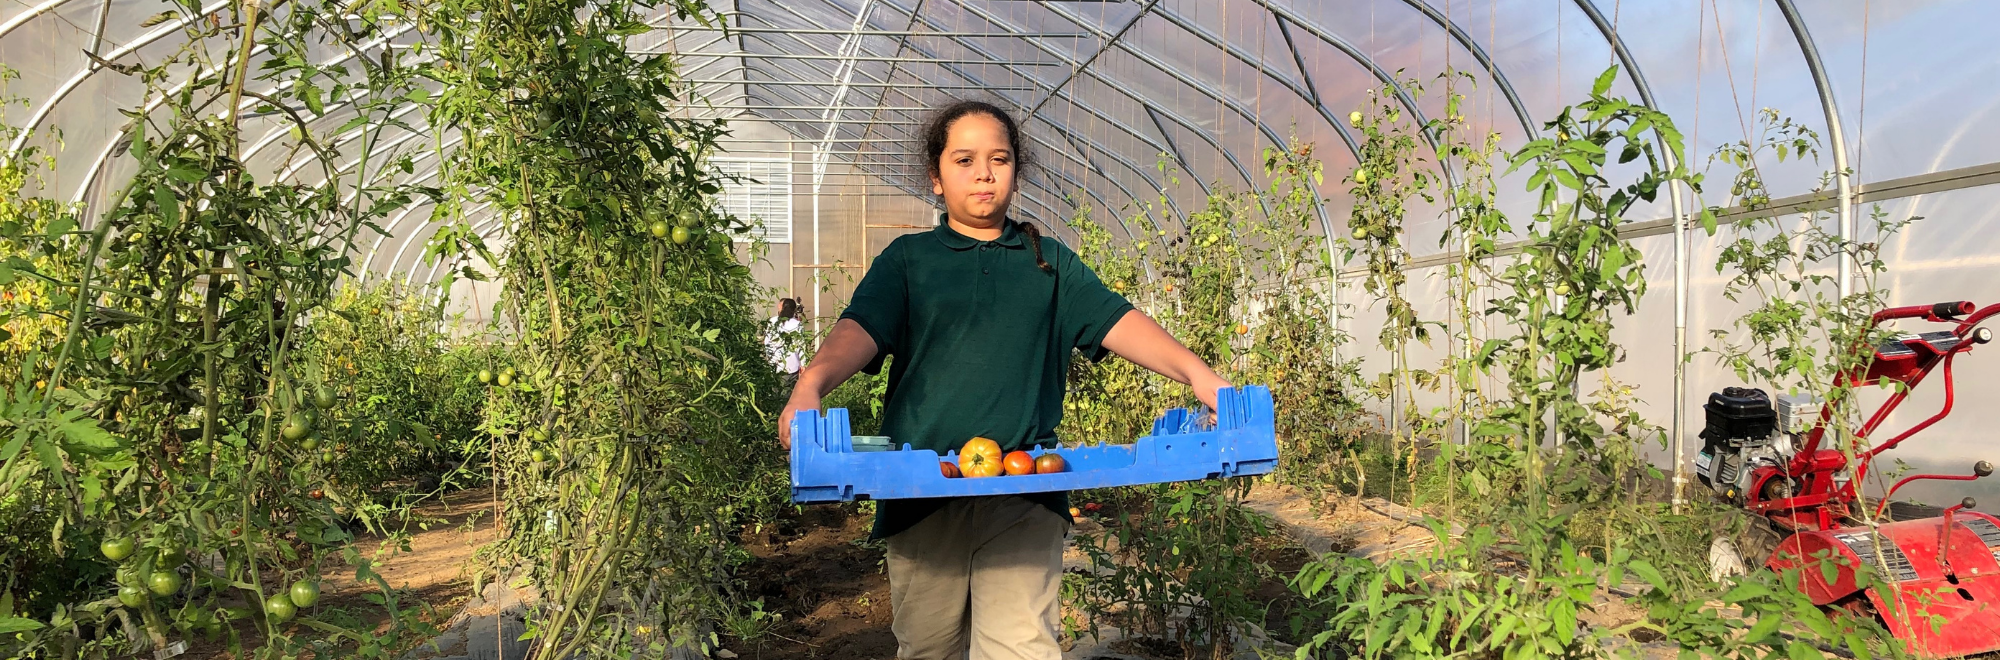 boy carrying flat of tomatoes in a high tunnel